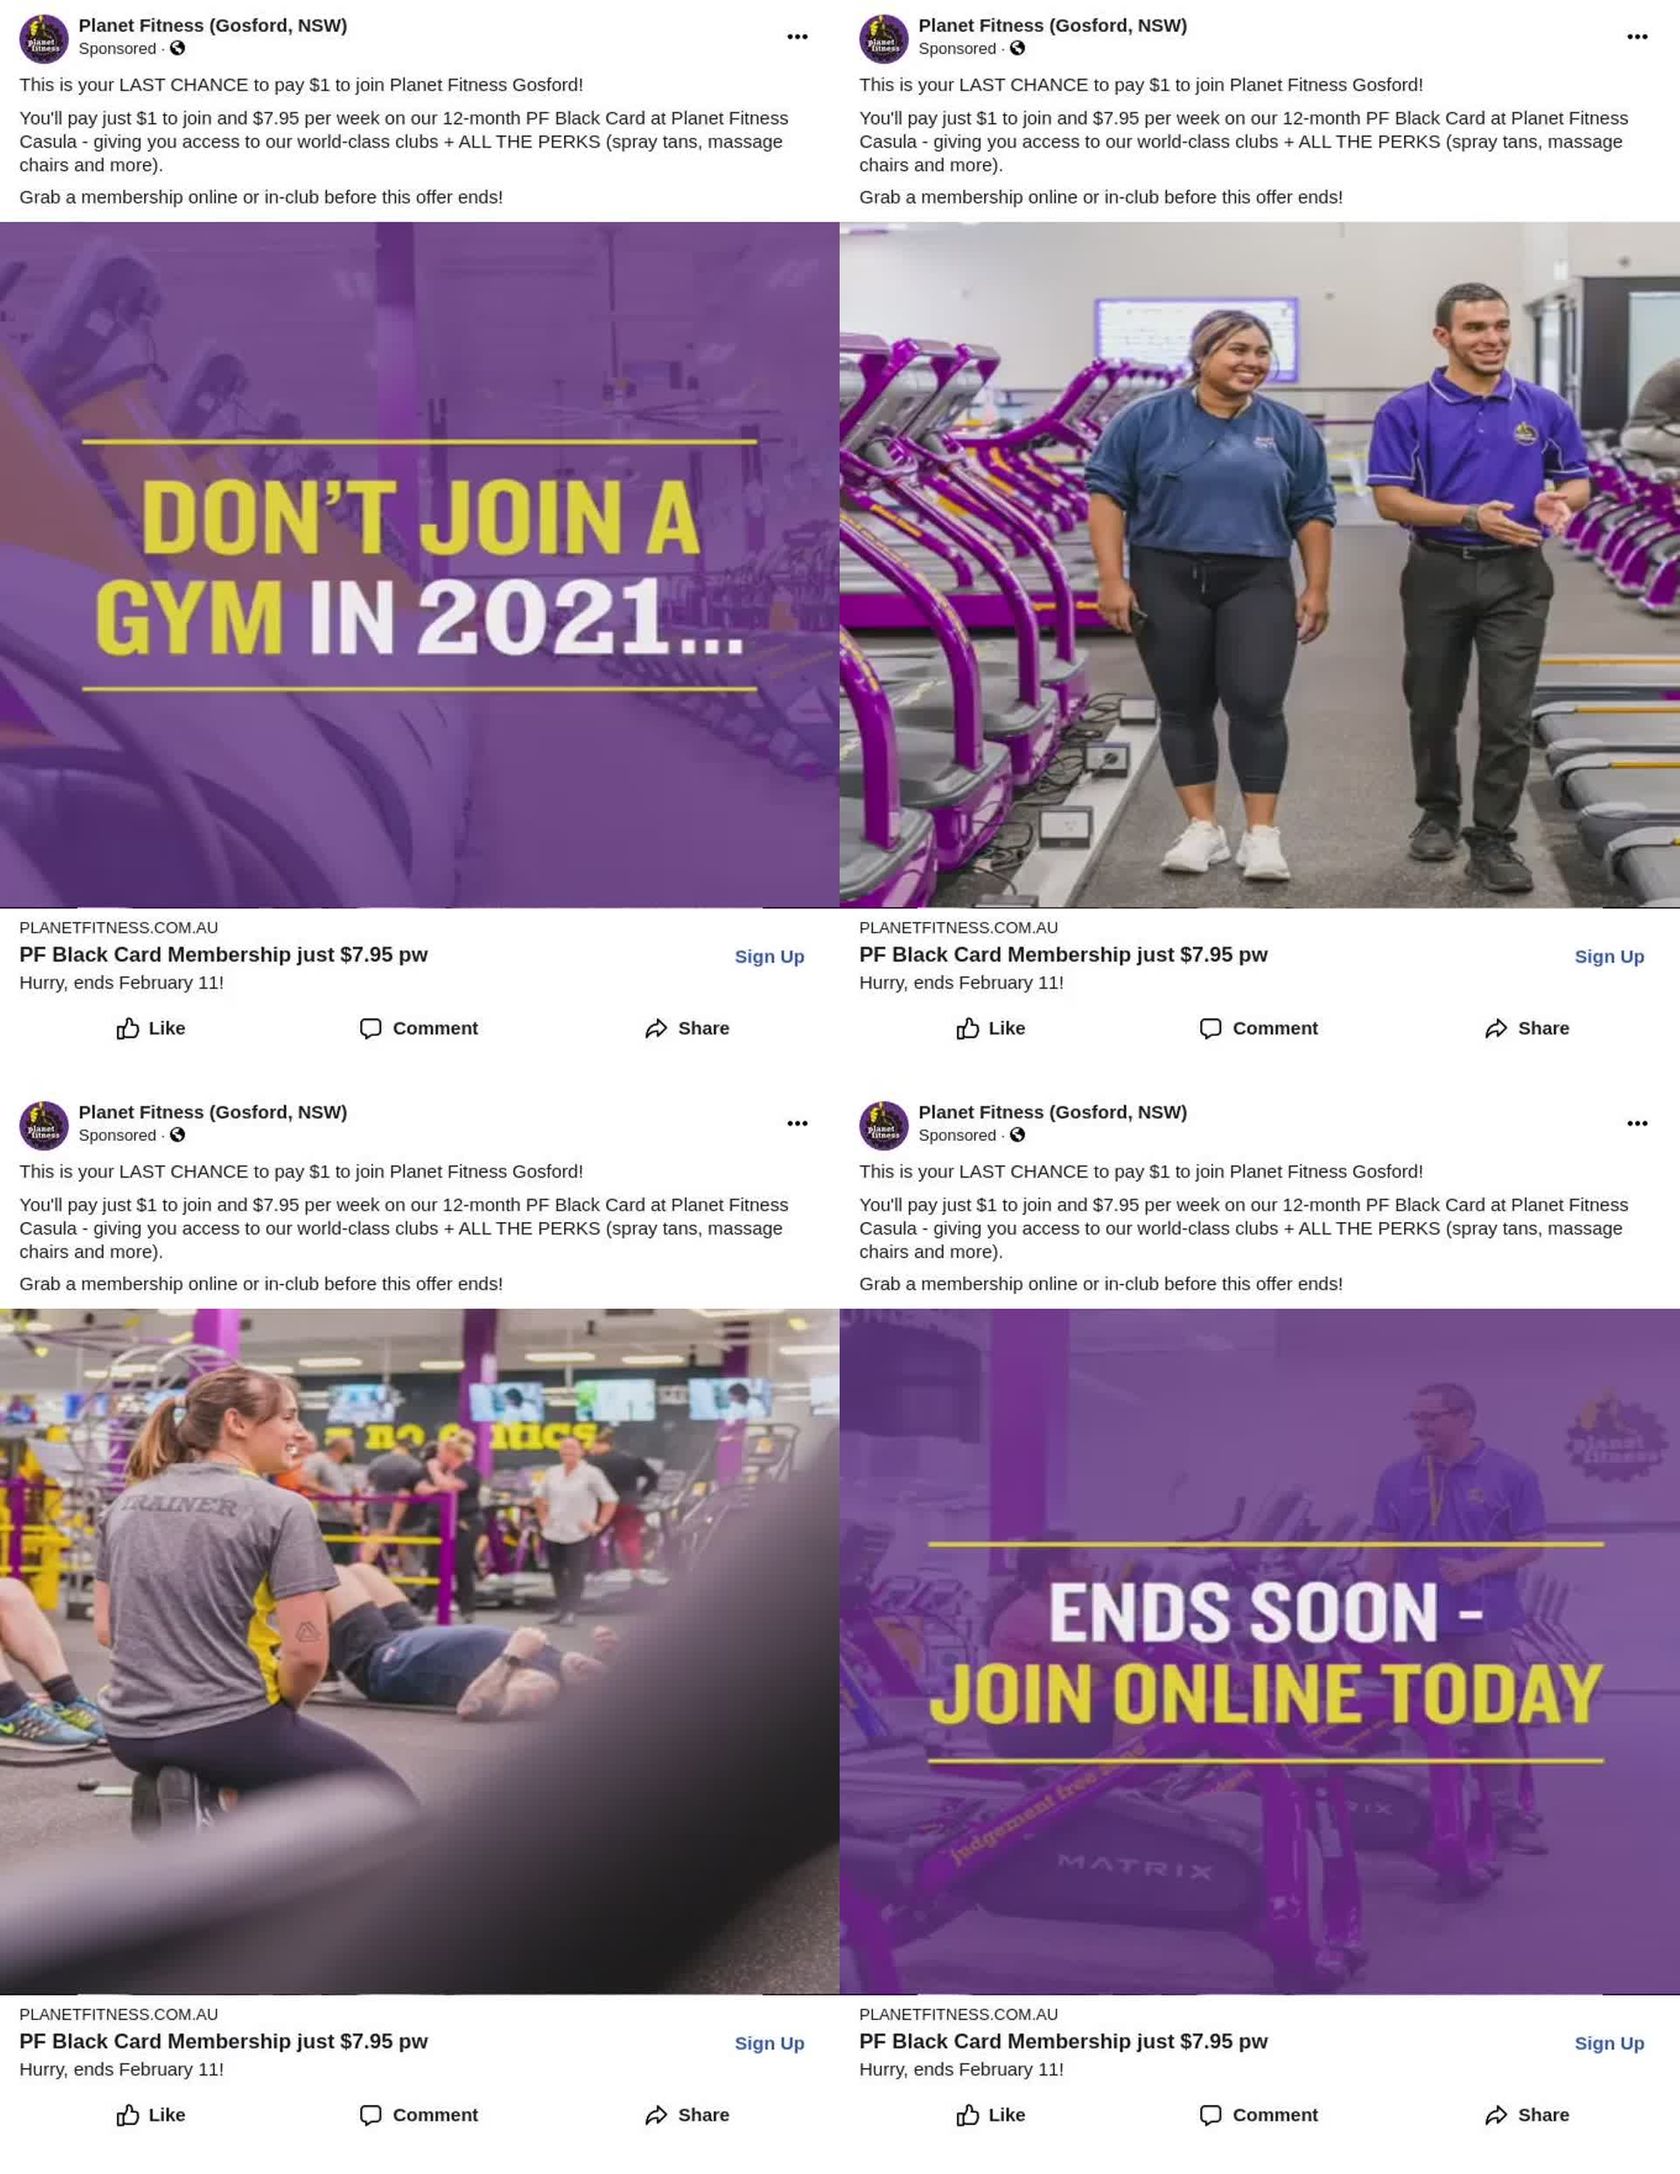 30 Minute Planet Fitness Promo Code July 2021 for Burn Fat fast